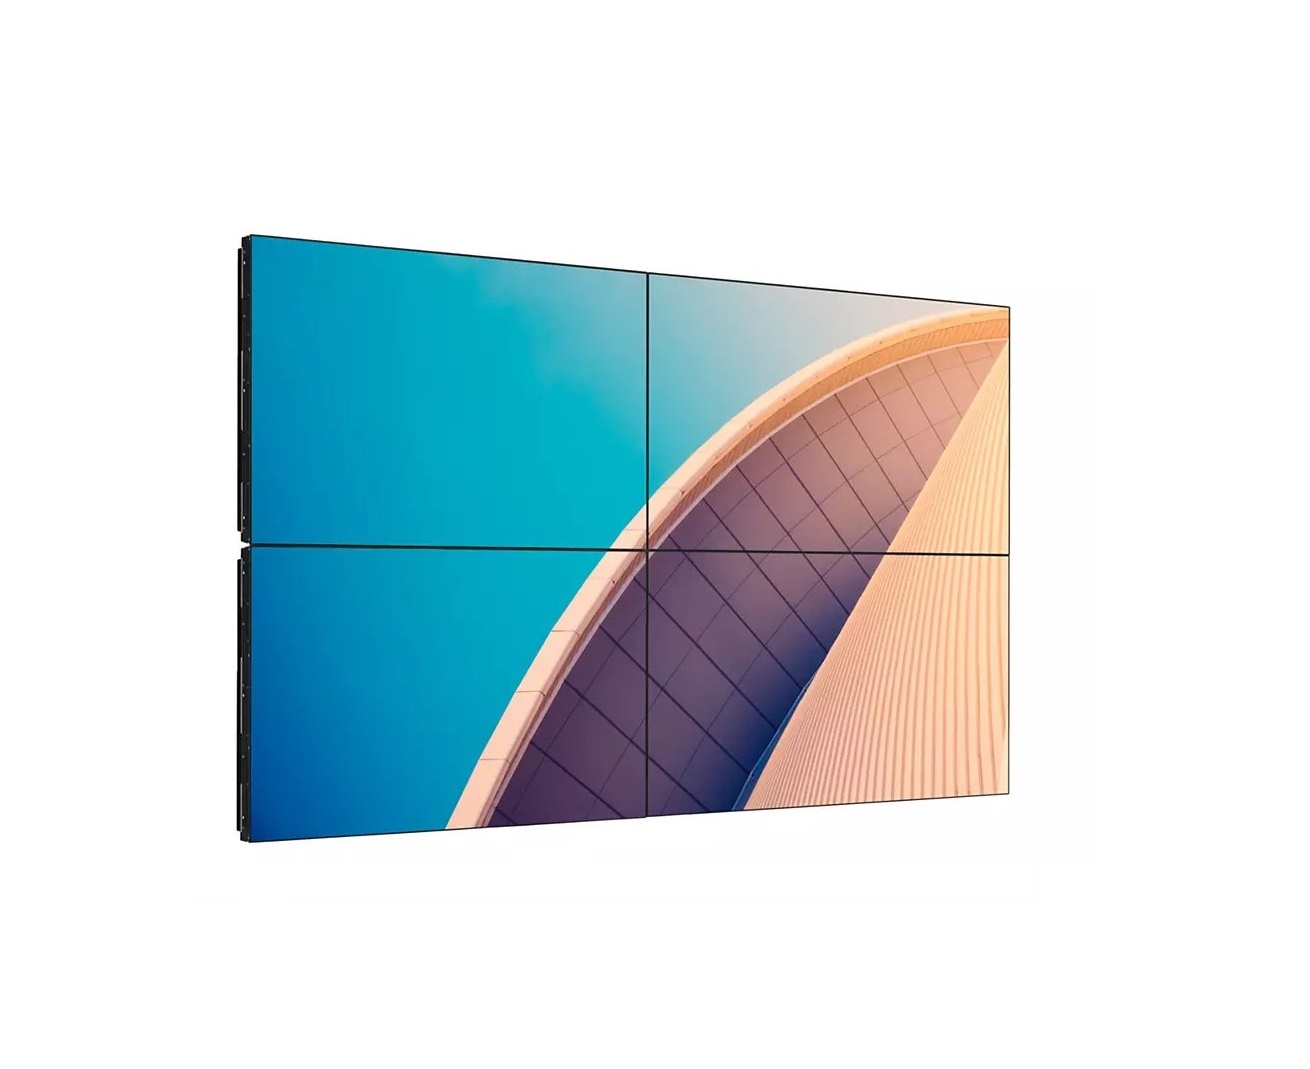 Philips 55 BDL2005X Fullhd 1920x1080 Class Hd Commercial Ips Led Display 55BDL2005X/00